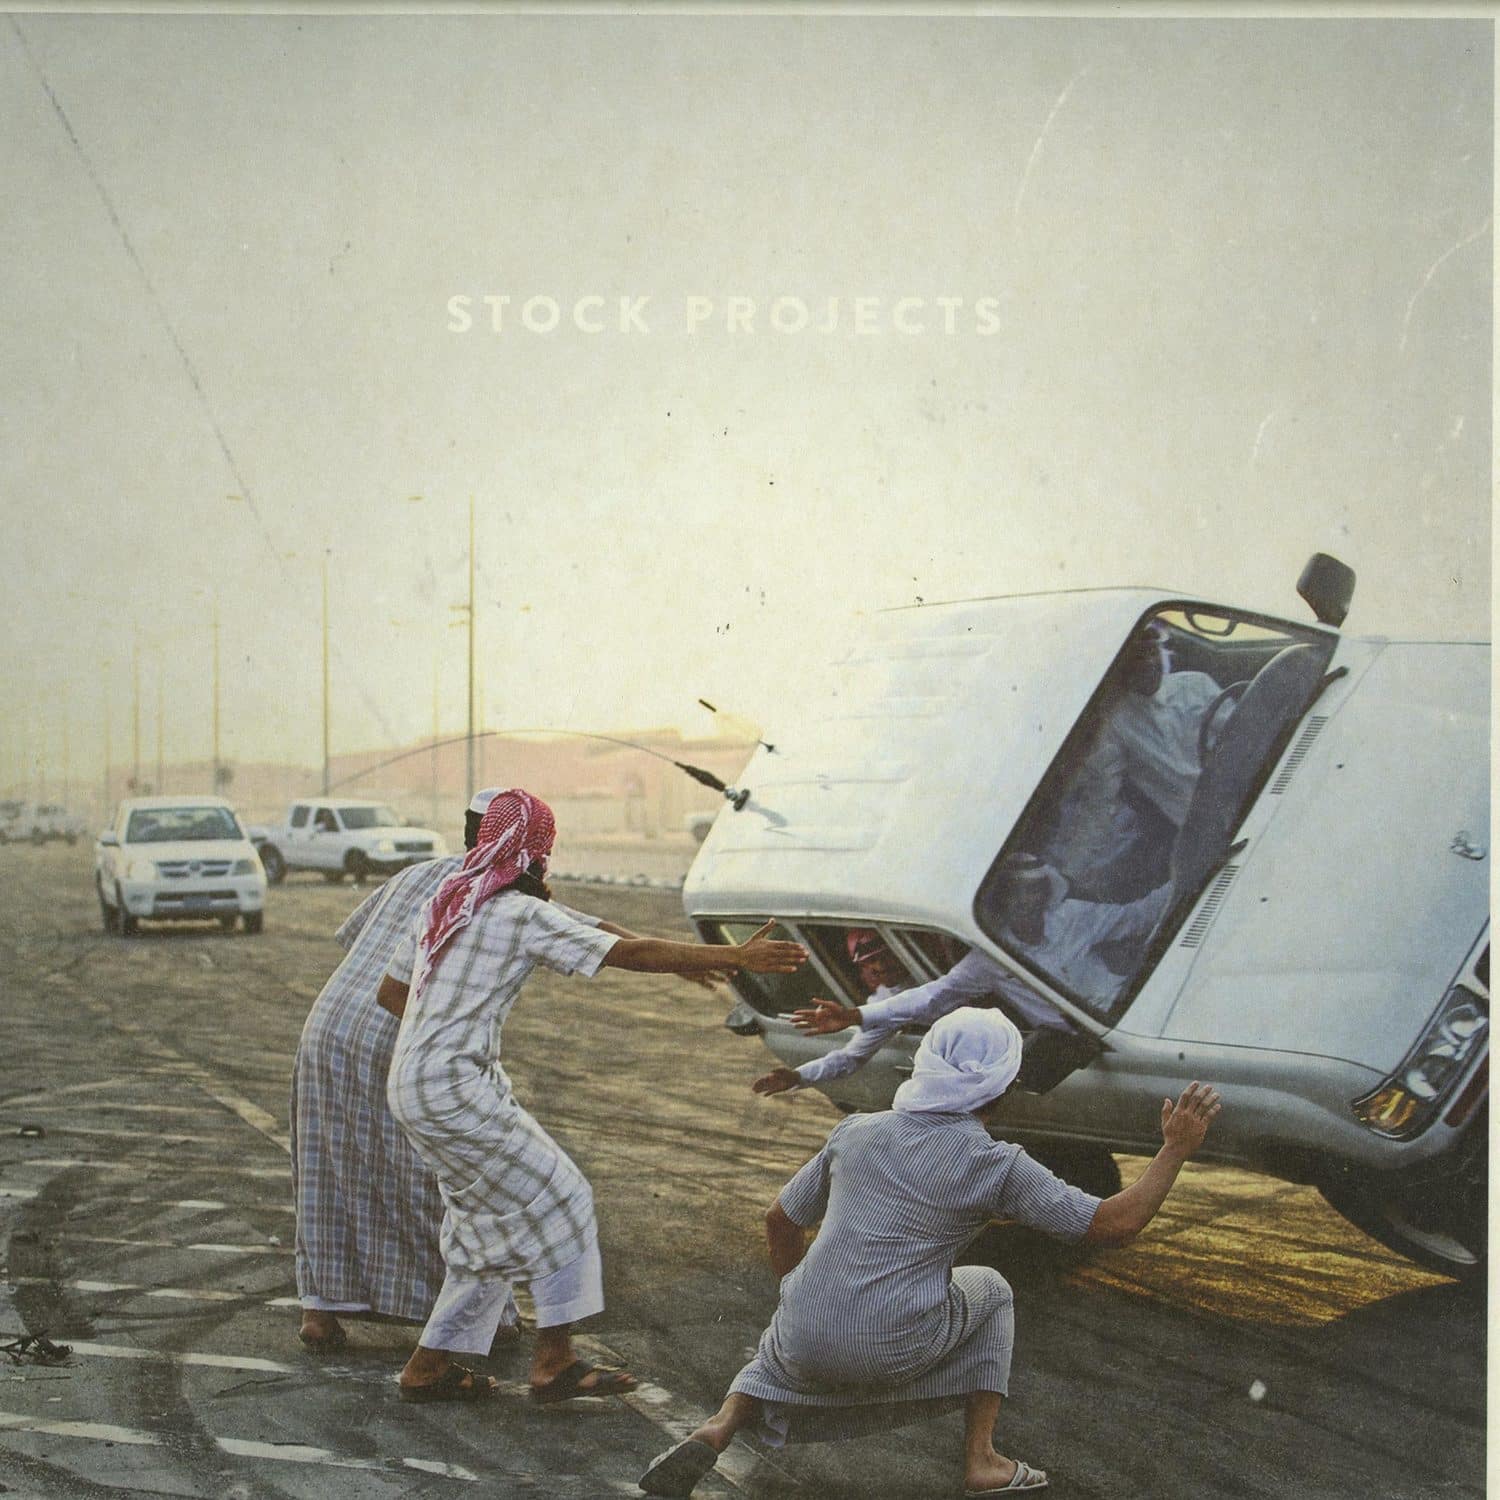 Stock Projects - STOCK PROJECTS